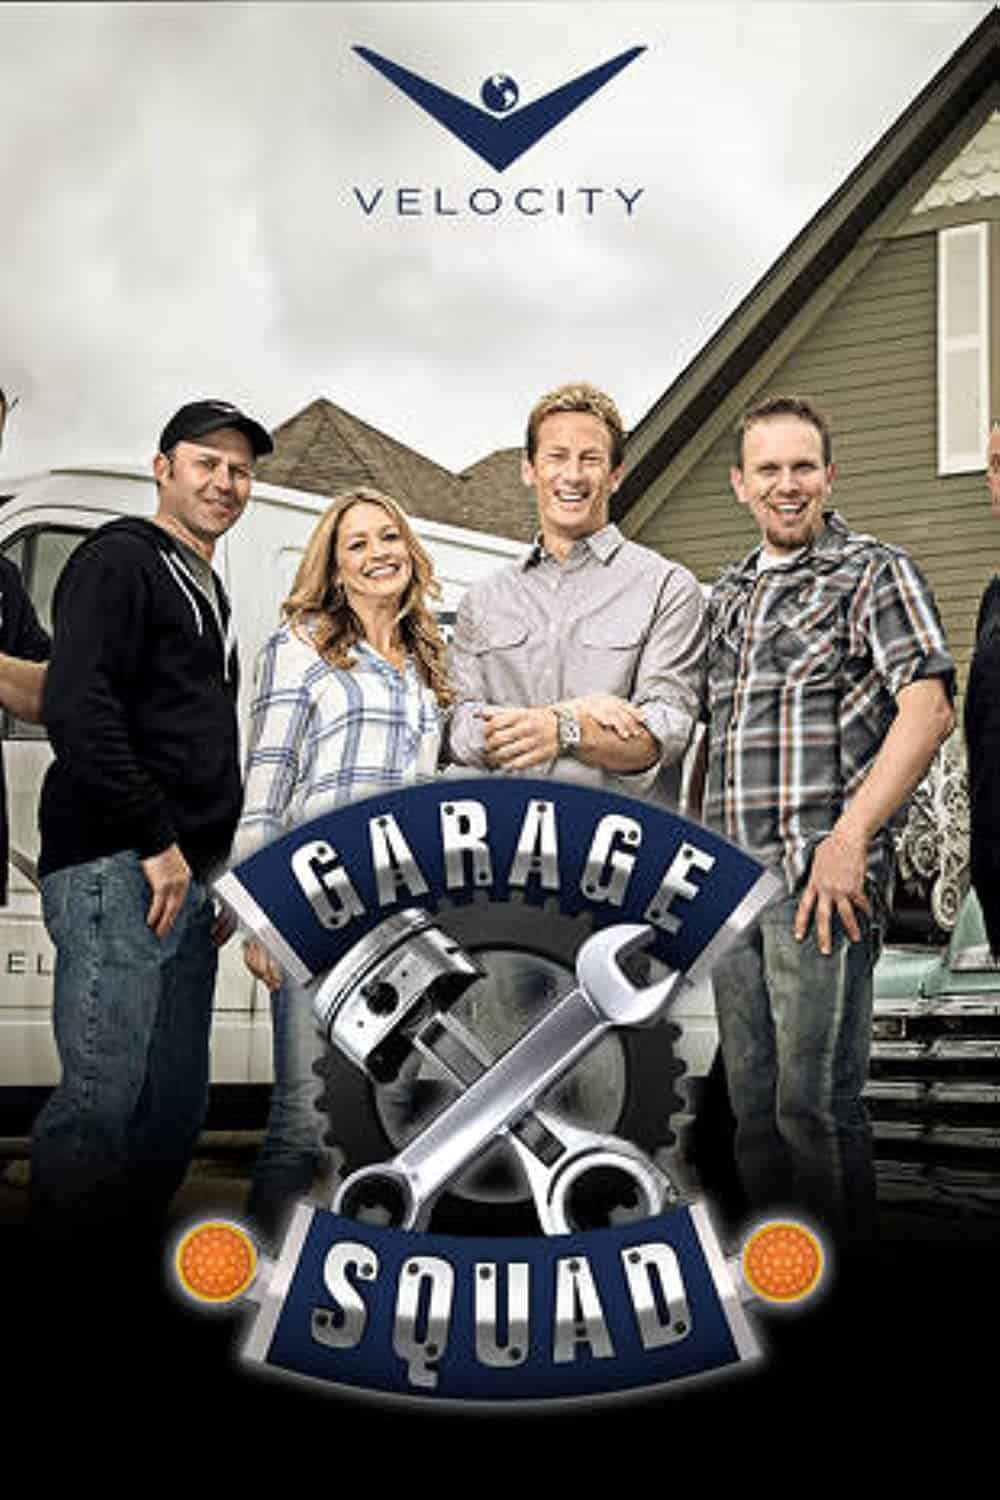 Image of the latest Garage Squad cast members